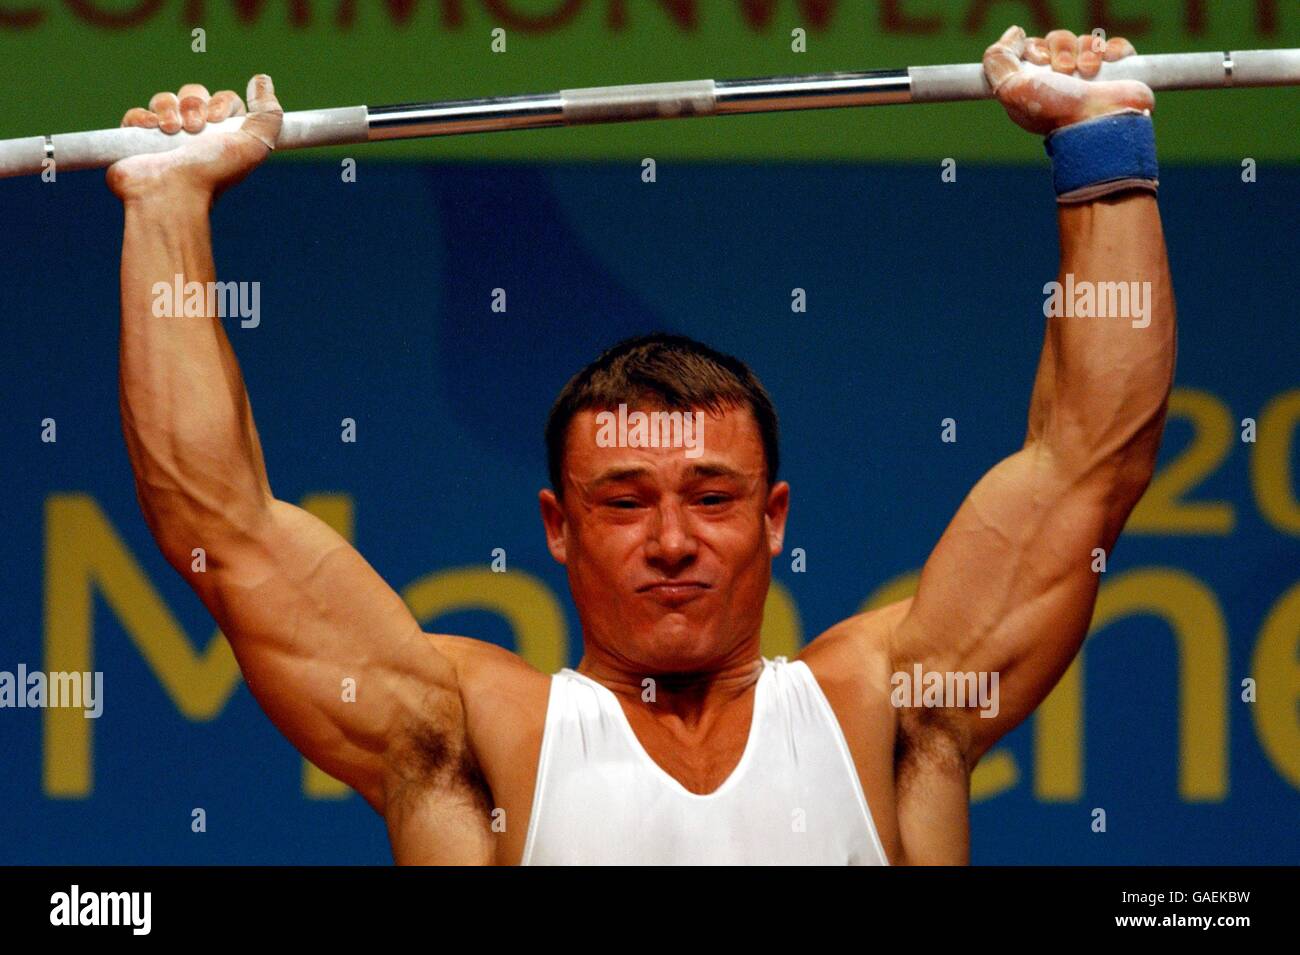 Manchester 2002 - Commonwealth Games - Weightlifting - Men up to 94 kg Stock Photo